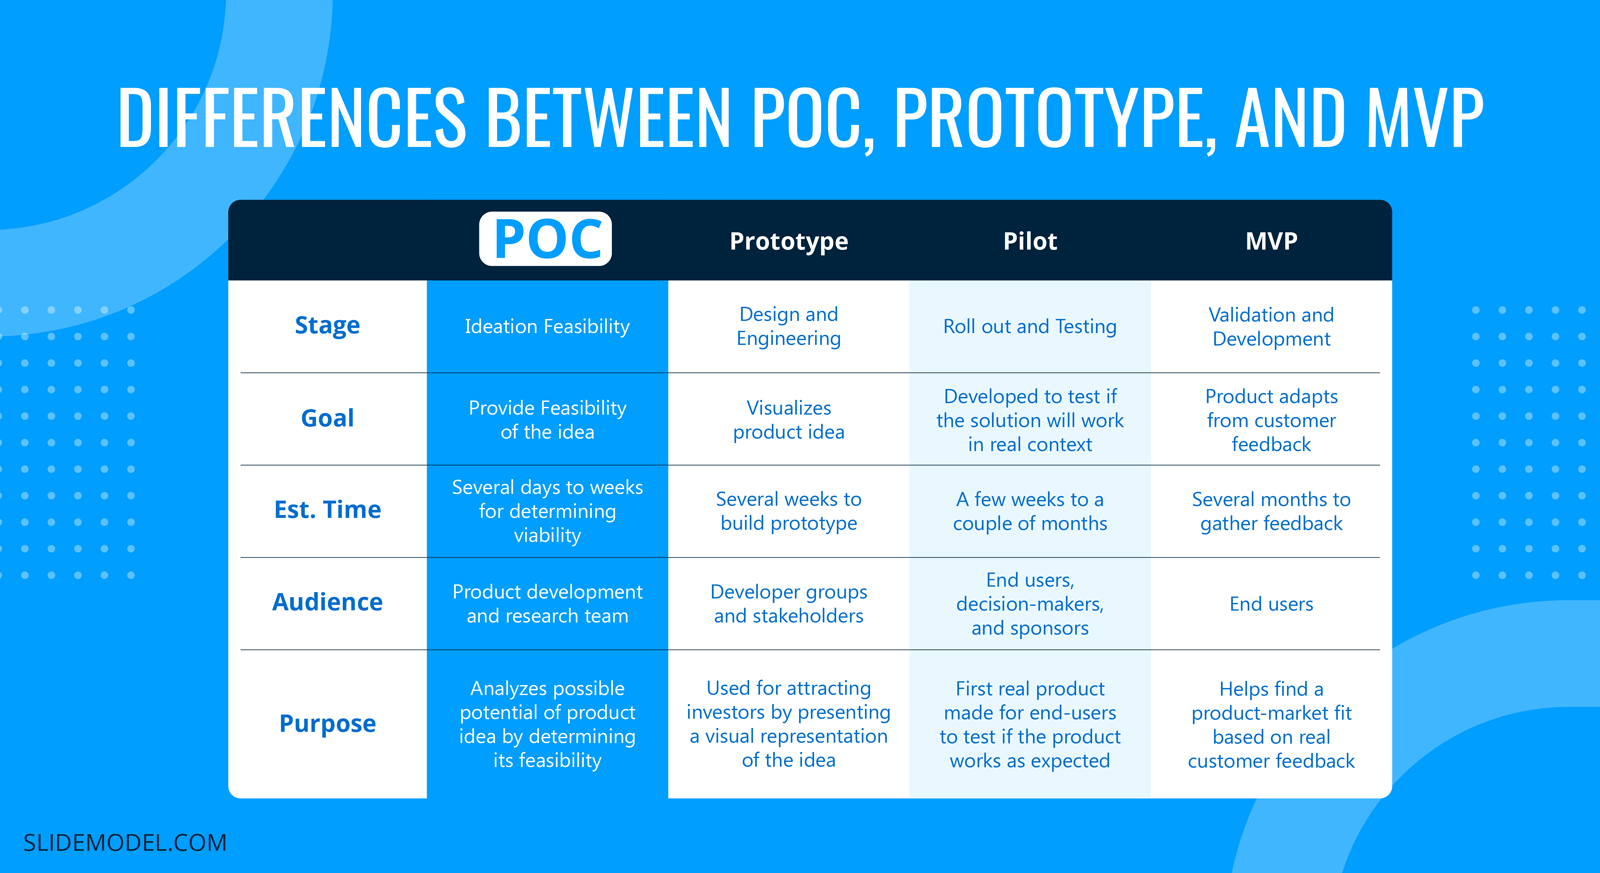 Differences Between POC, Prototype, and MVP